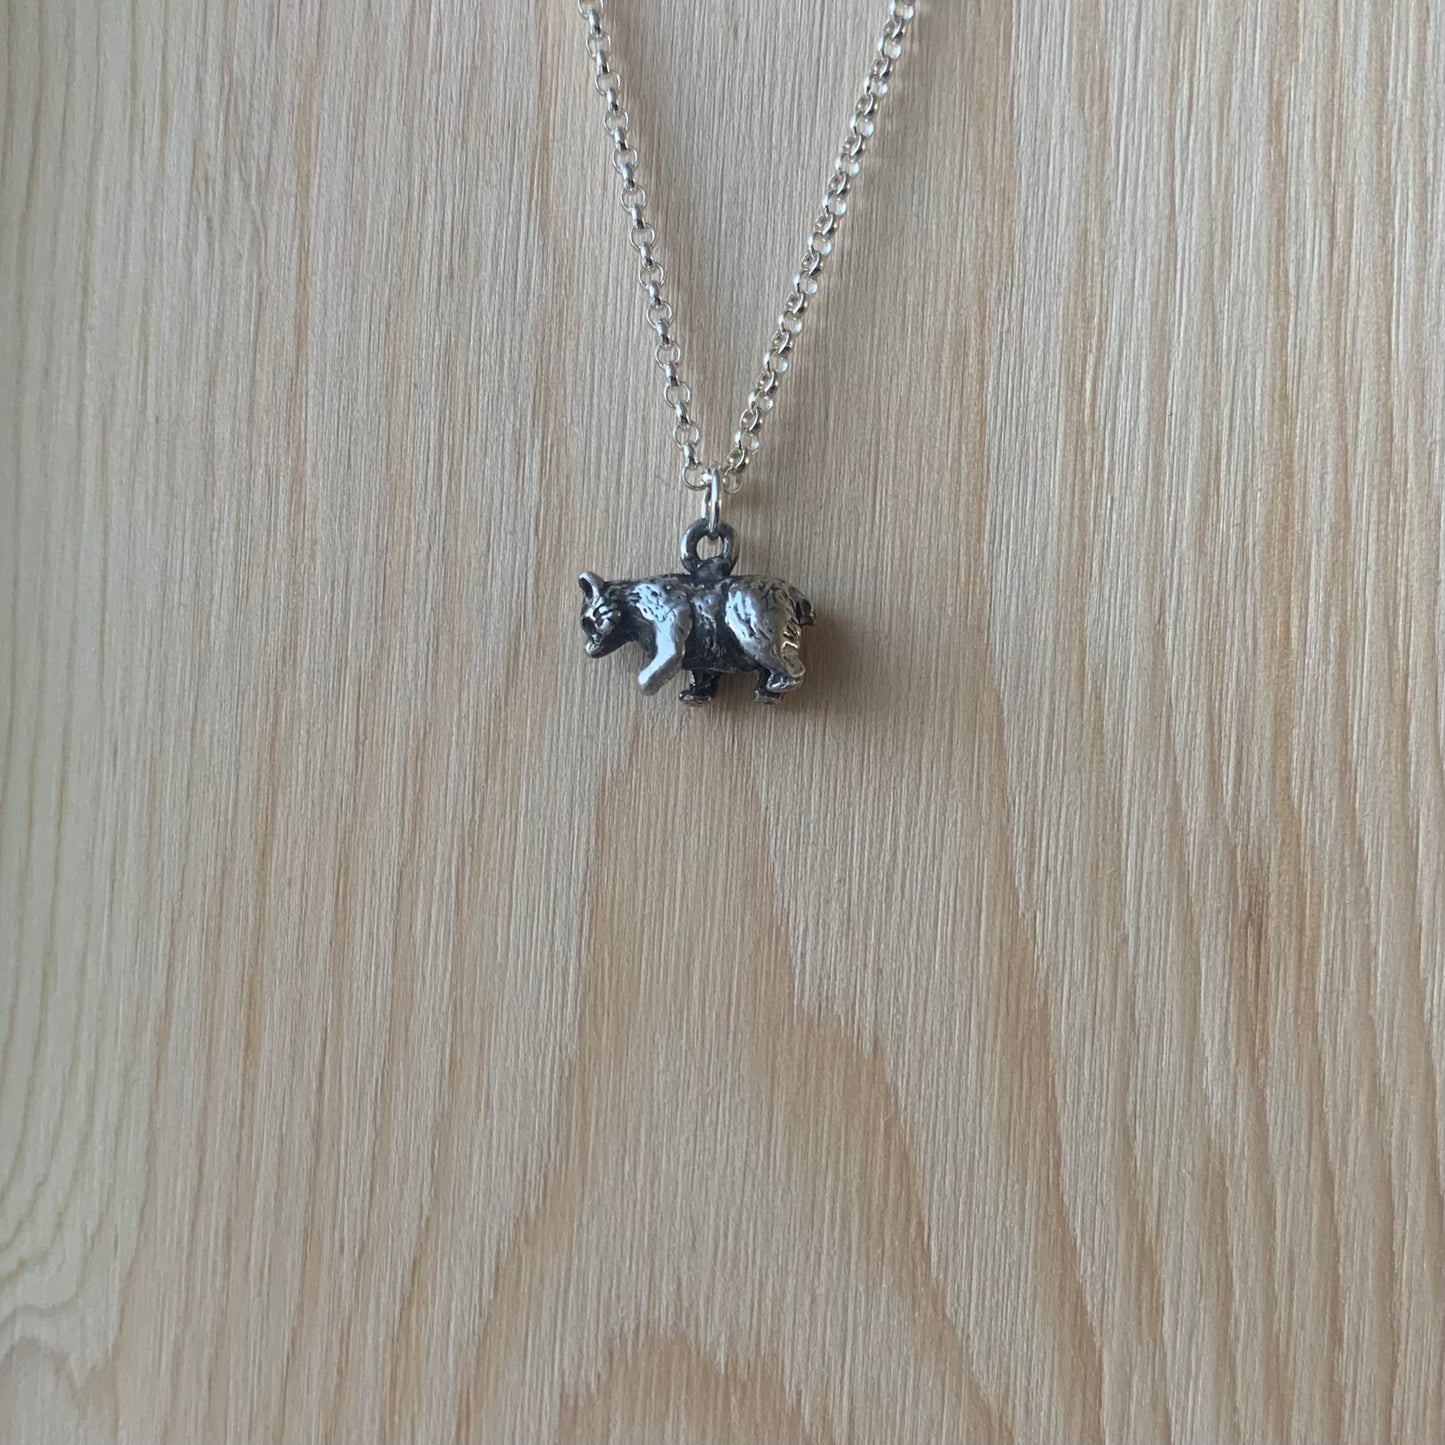 Unmarked Industries Bear Cub Necklace